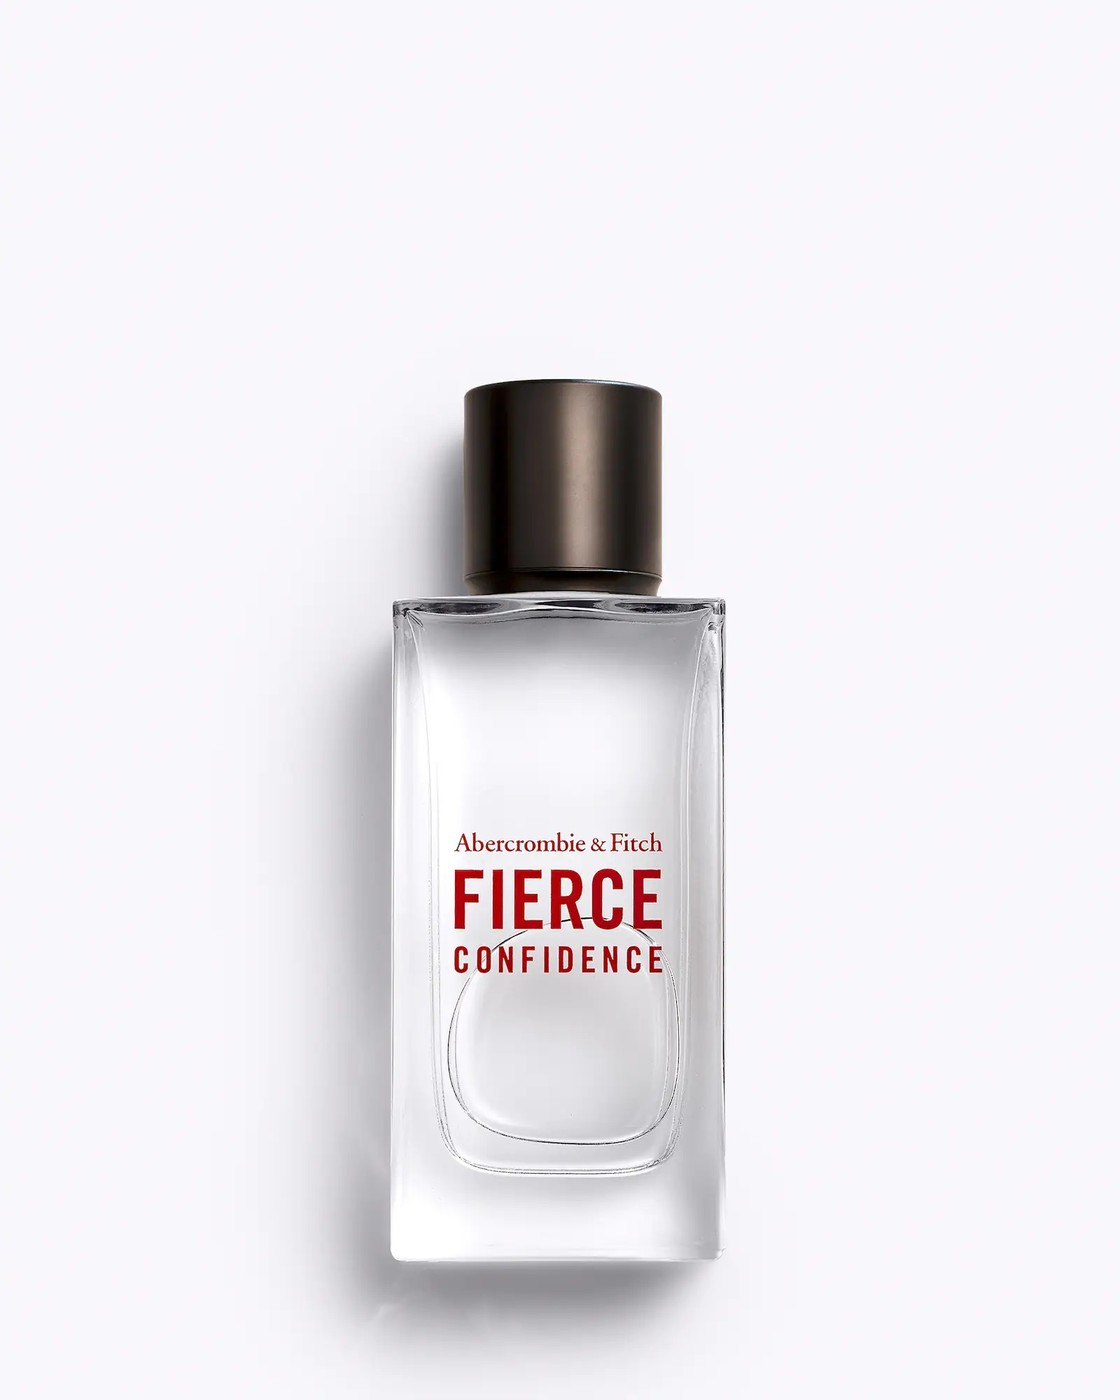 Парфюм Abercrombie & Fitch Fierce Сonfidence Cologne 50 мл